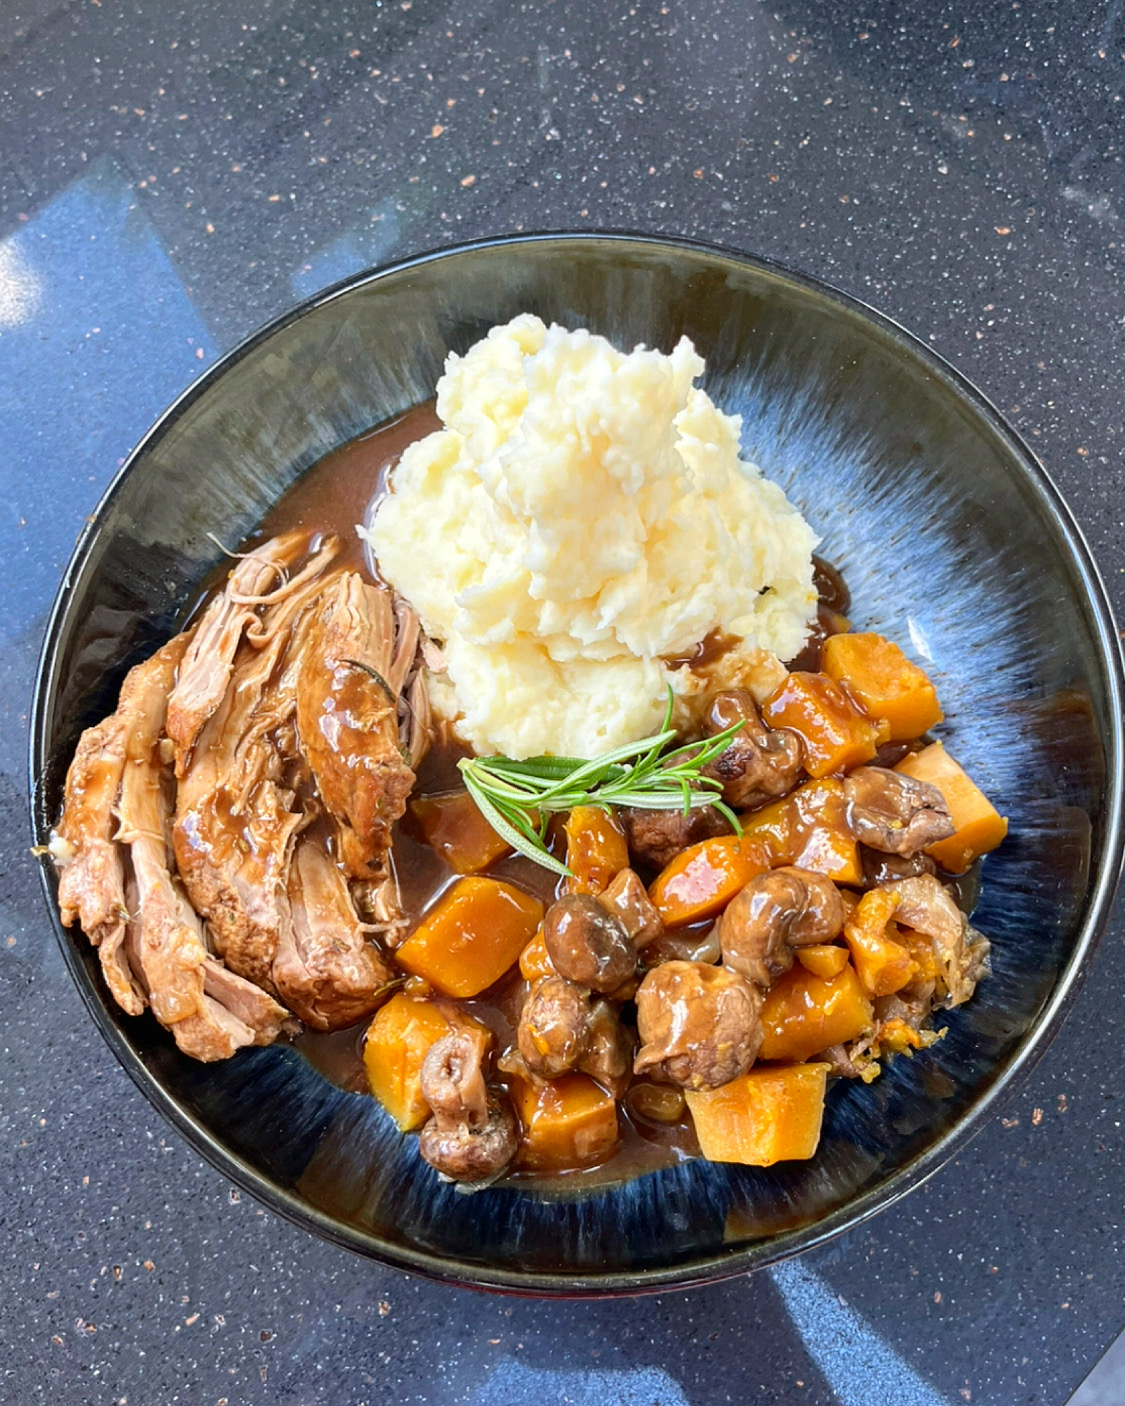 Slow cooker Pork and squash 